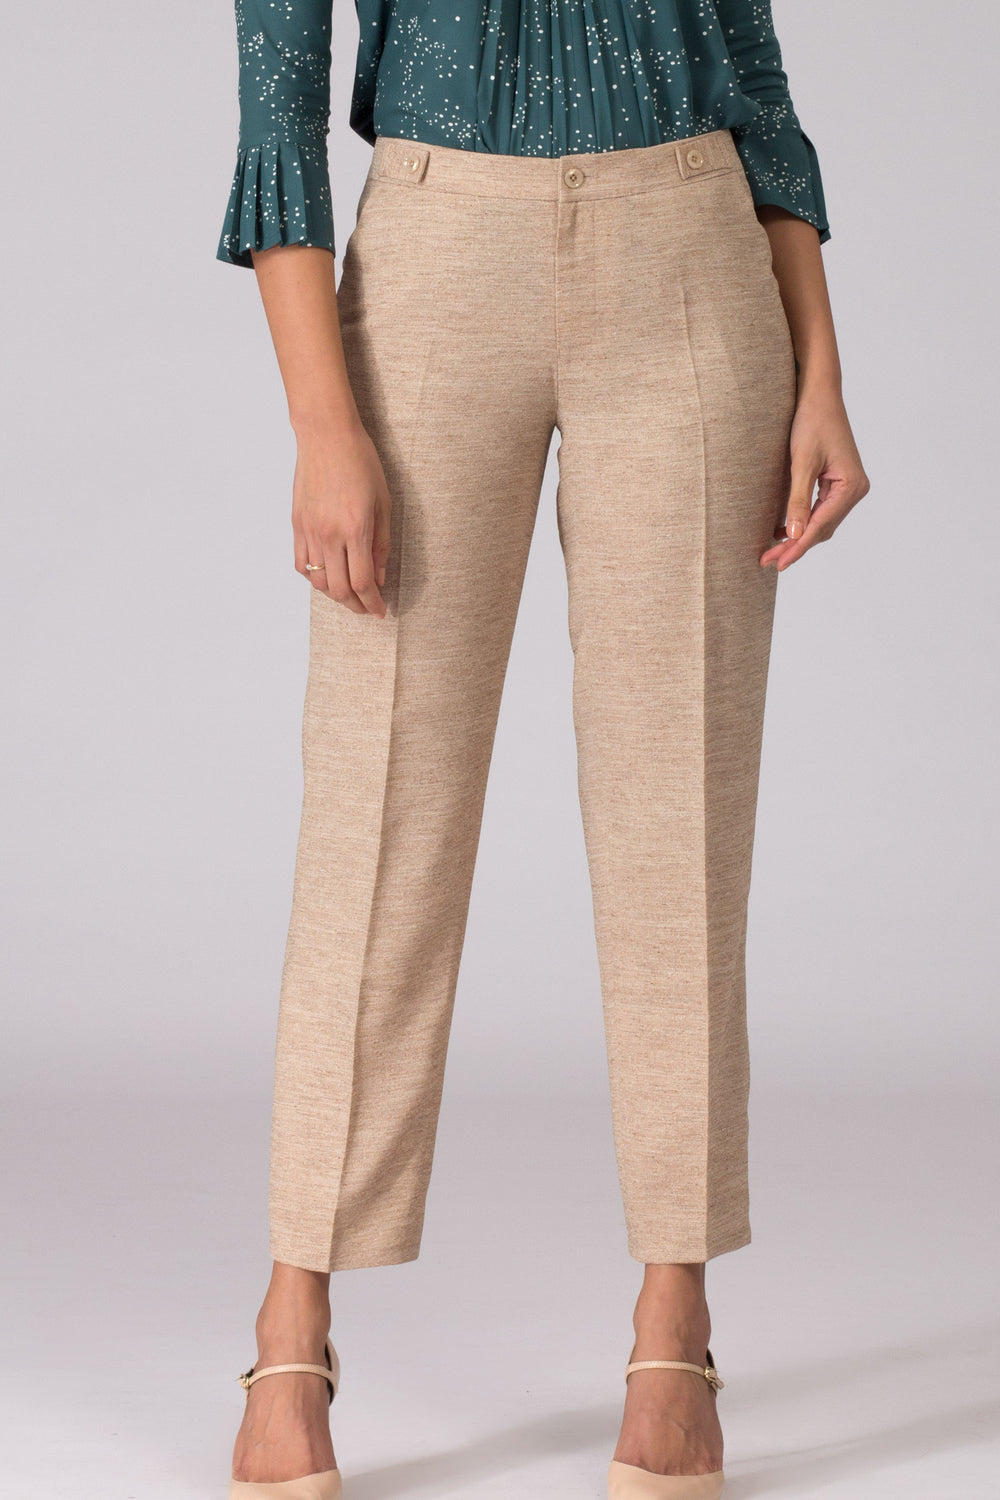 Buy Formal Trousers For Women Online In India At Lowest Prices | Tata CLiQ